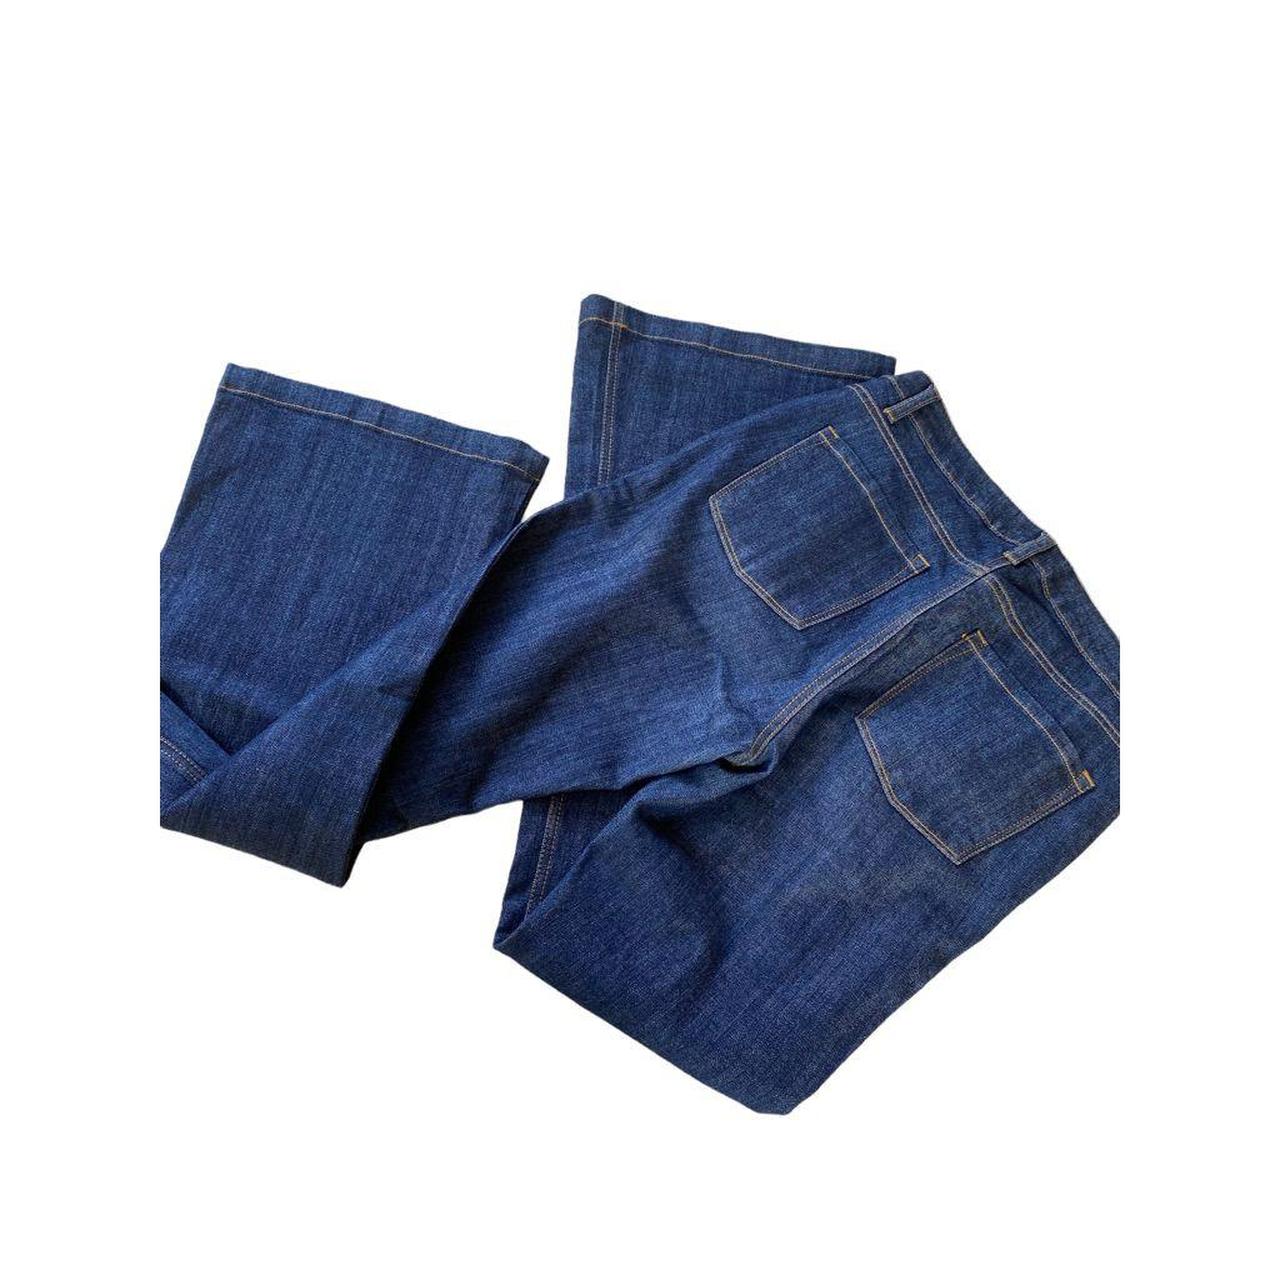 Product Image 3 - Mossimo bell bottom jeans size